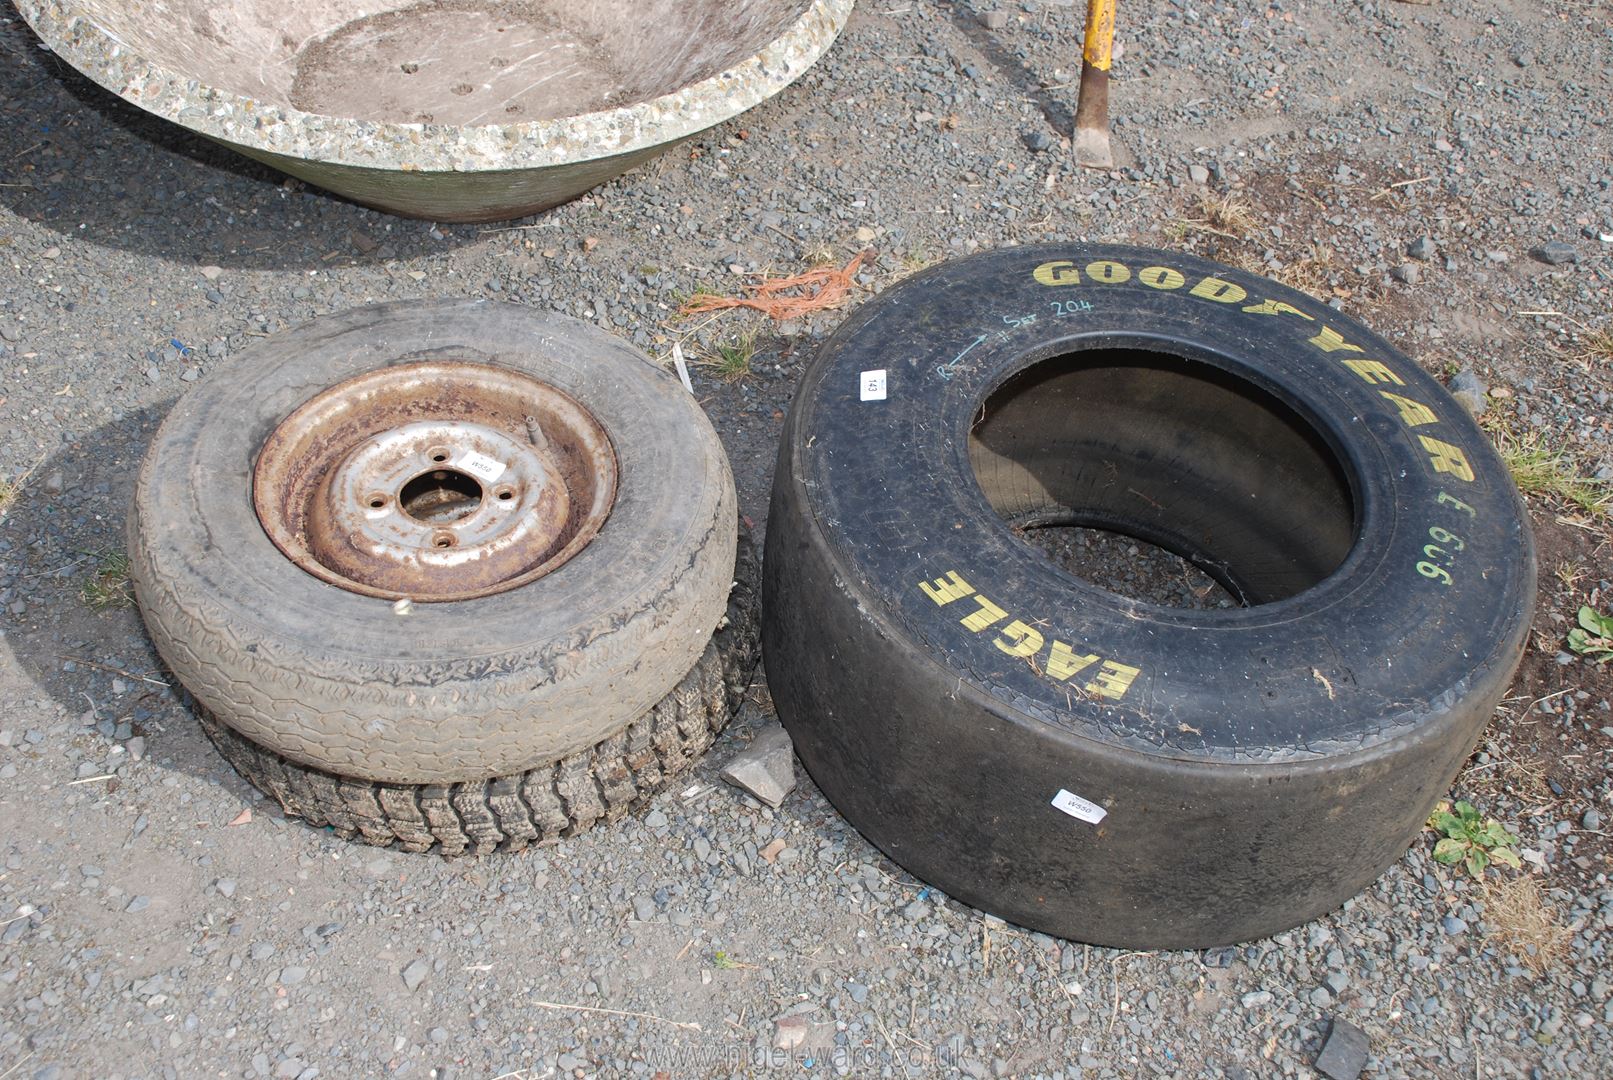 A Good Year racing car tyre 25.5 x 9.5. x 13 and two mini tyres; including one Mud & Snow tyre.